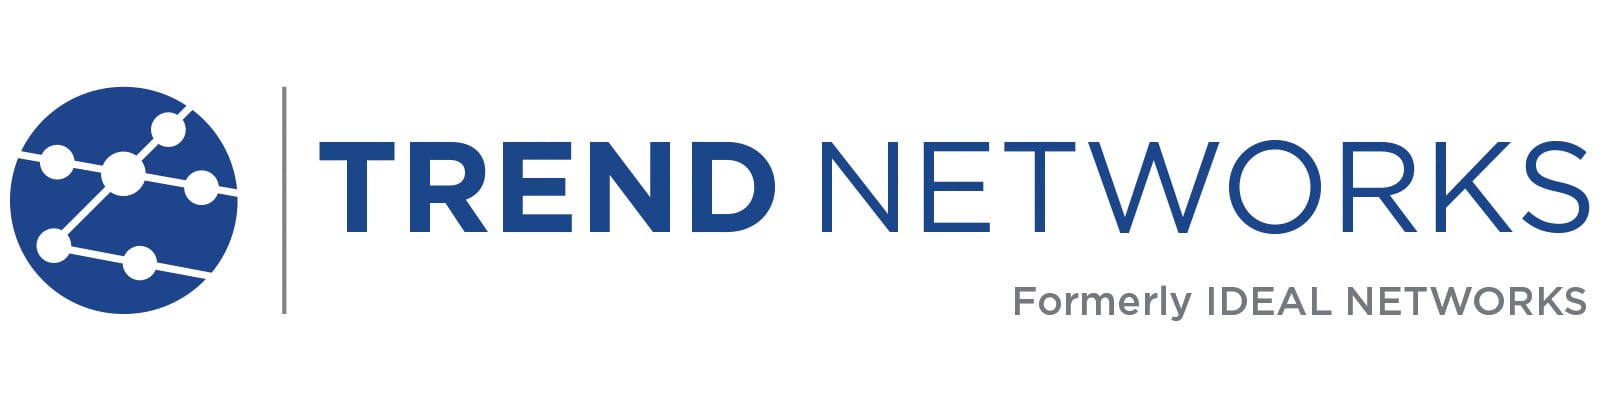 TREND NETWORKS logo_formerly IDEAL NETWORKS